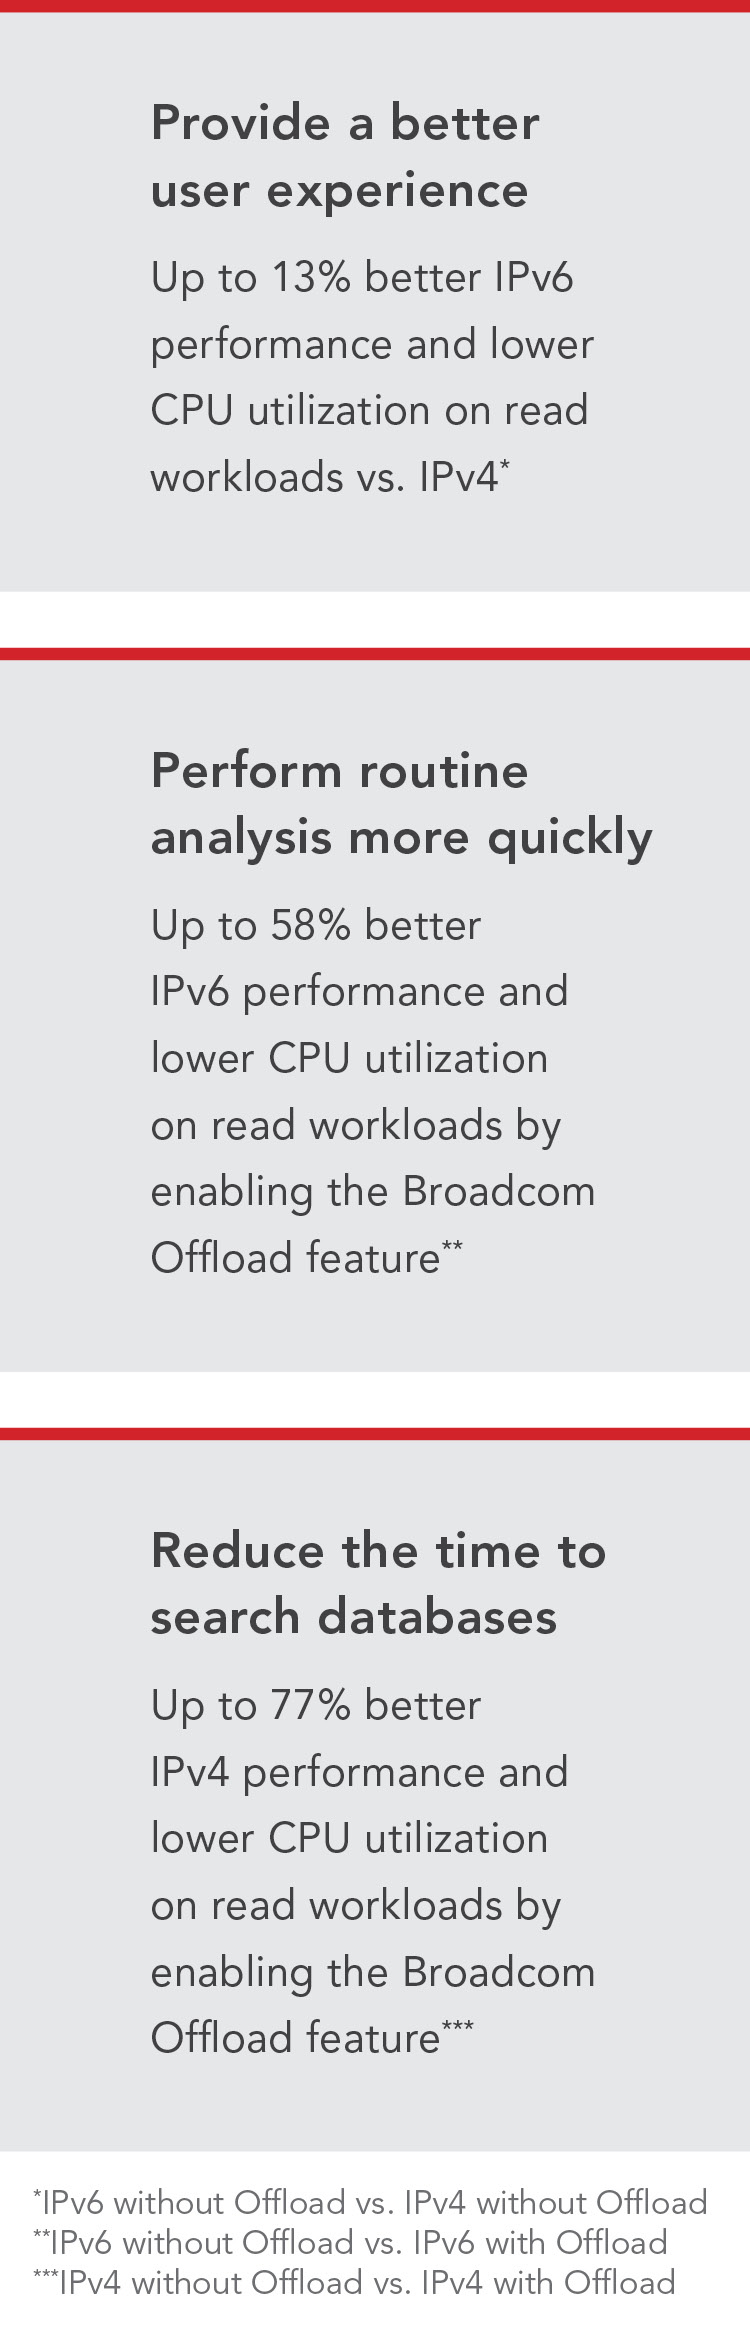 Provide a better user experience with up to 13% better IPv6 performance and lower CPU utilization on read workloads vs. IPv4 (in tests with IPv6 without Offload vs. IPv4 without Offload). Perform routine analysis with up to 58% better IPv6 performance better and lower CPU utilization on read workloads by enabling the Broadcom Offload feature (in tests with IPv6 without Offload vs. IPv6 with Offload). Reduce the time to search databases with up to 77% better IPv4 performance and lower CPU utilization on read workloads by enabling the Broadcom Offload feature (in tests with IPv4 without Offload vs. IPv4 with Offload).